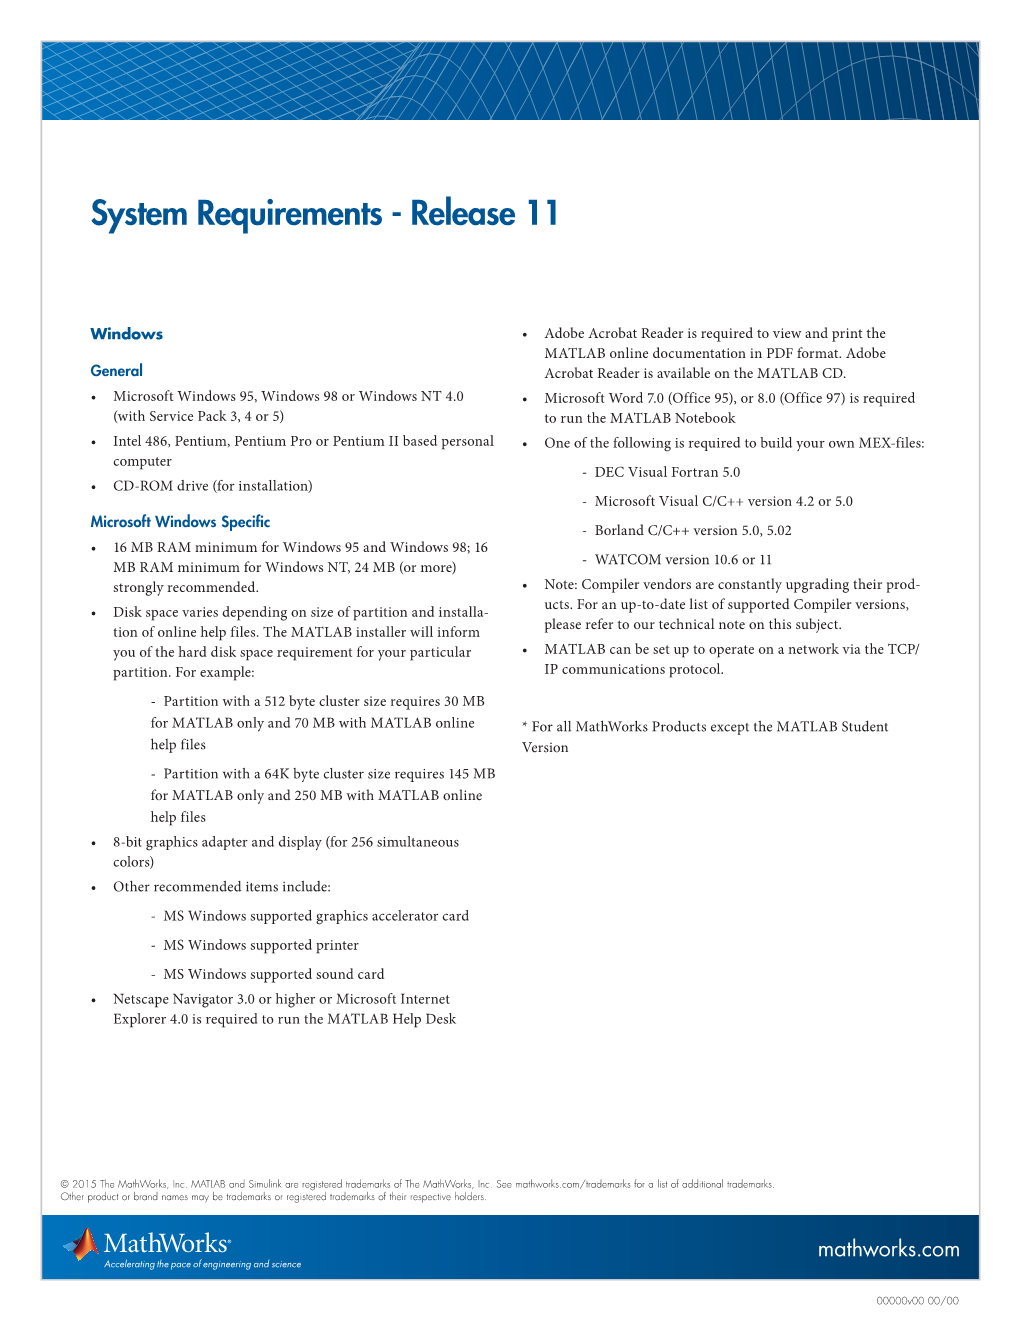 System Requirements - Release 11